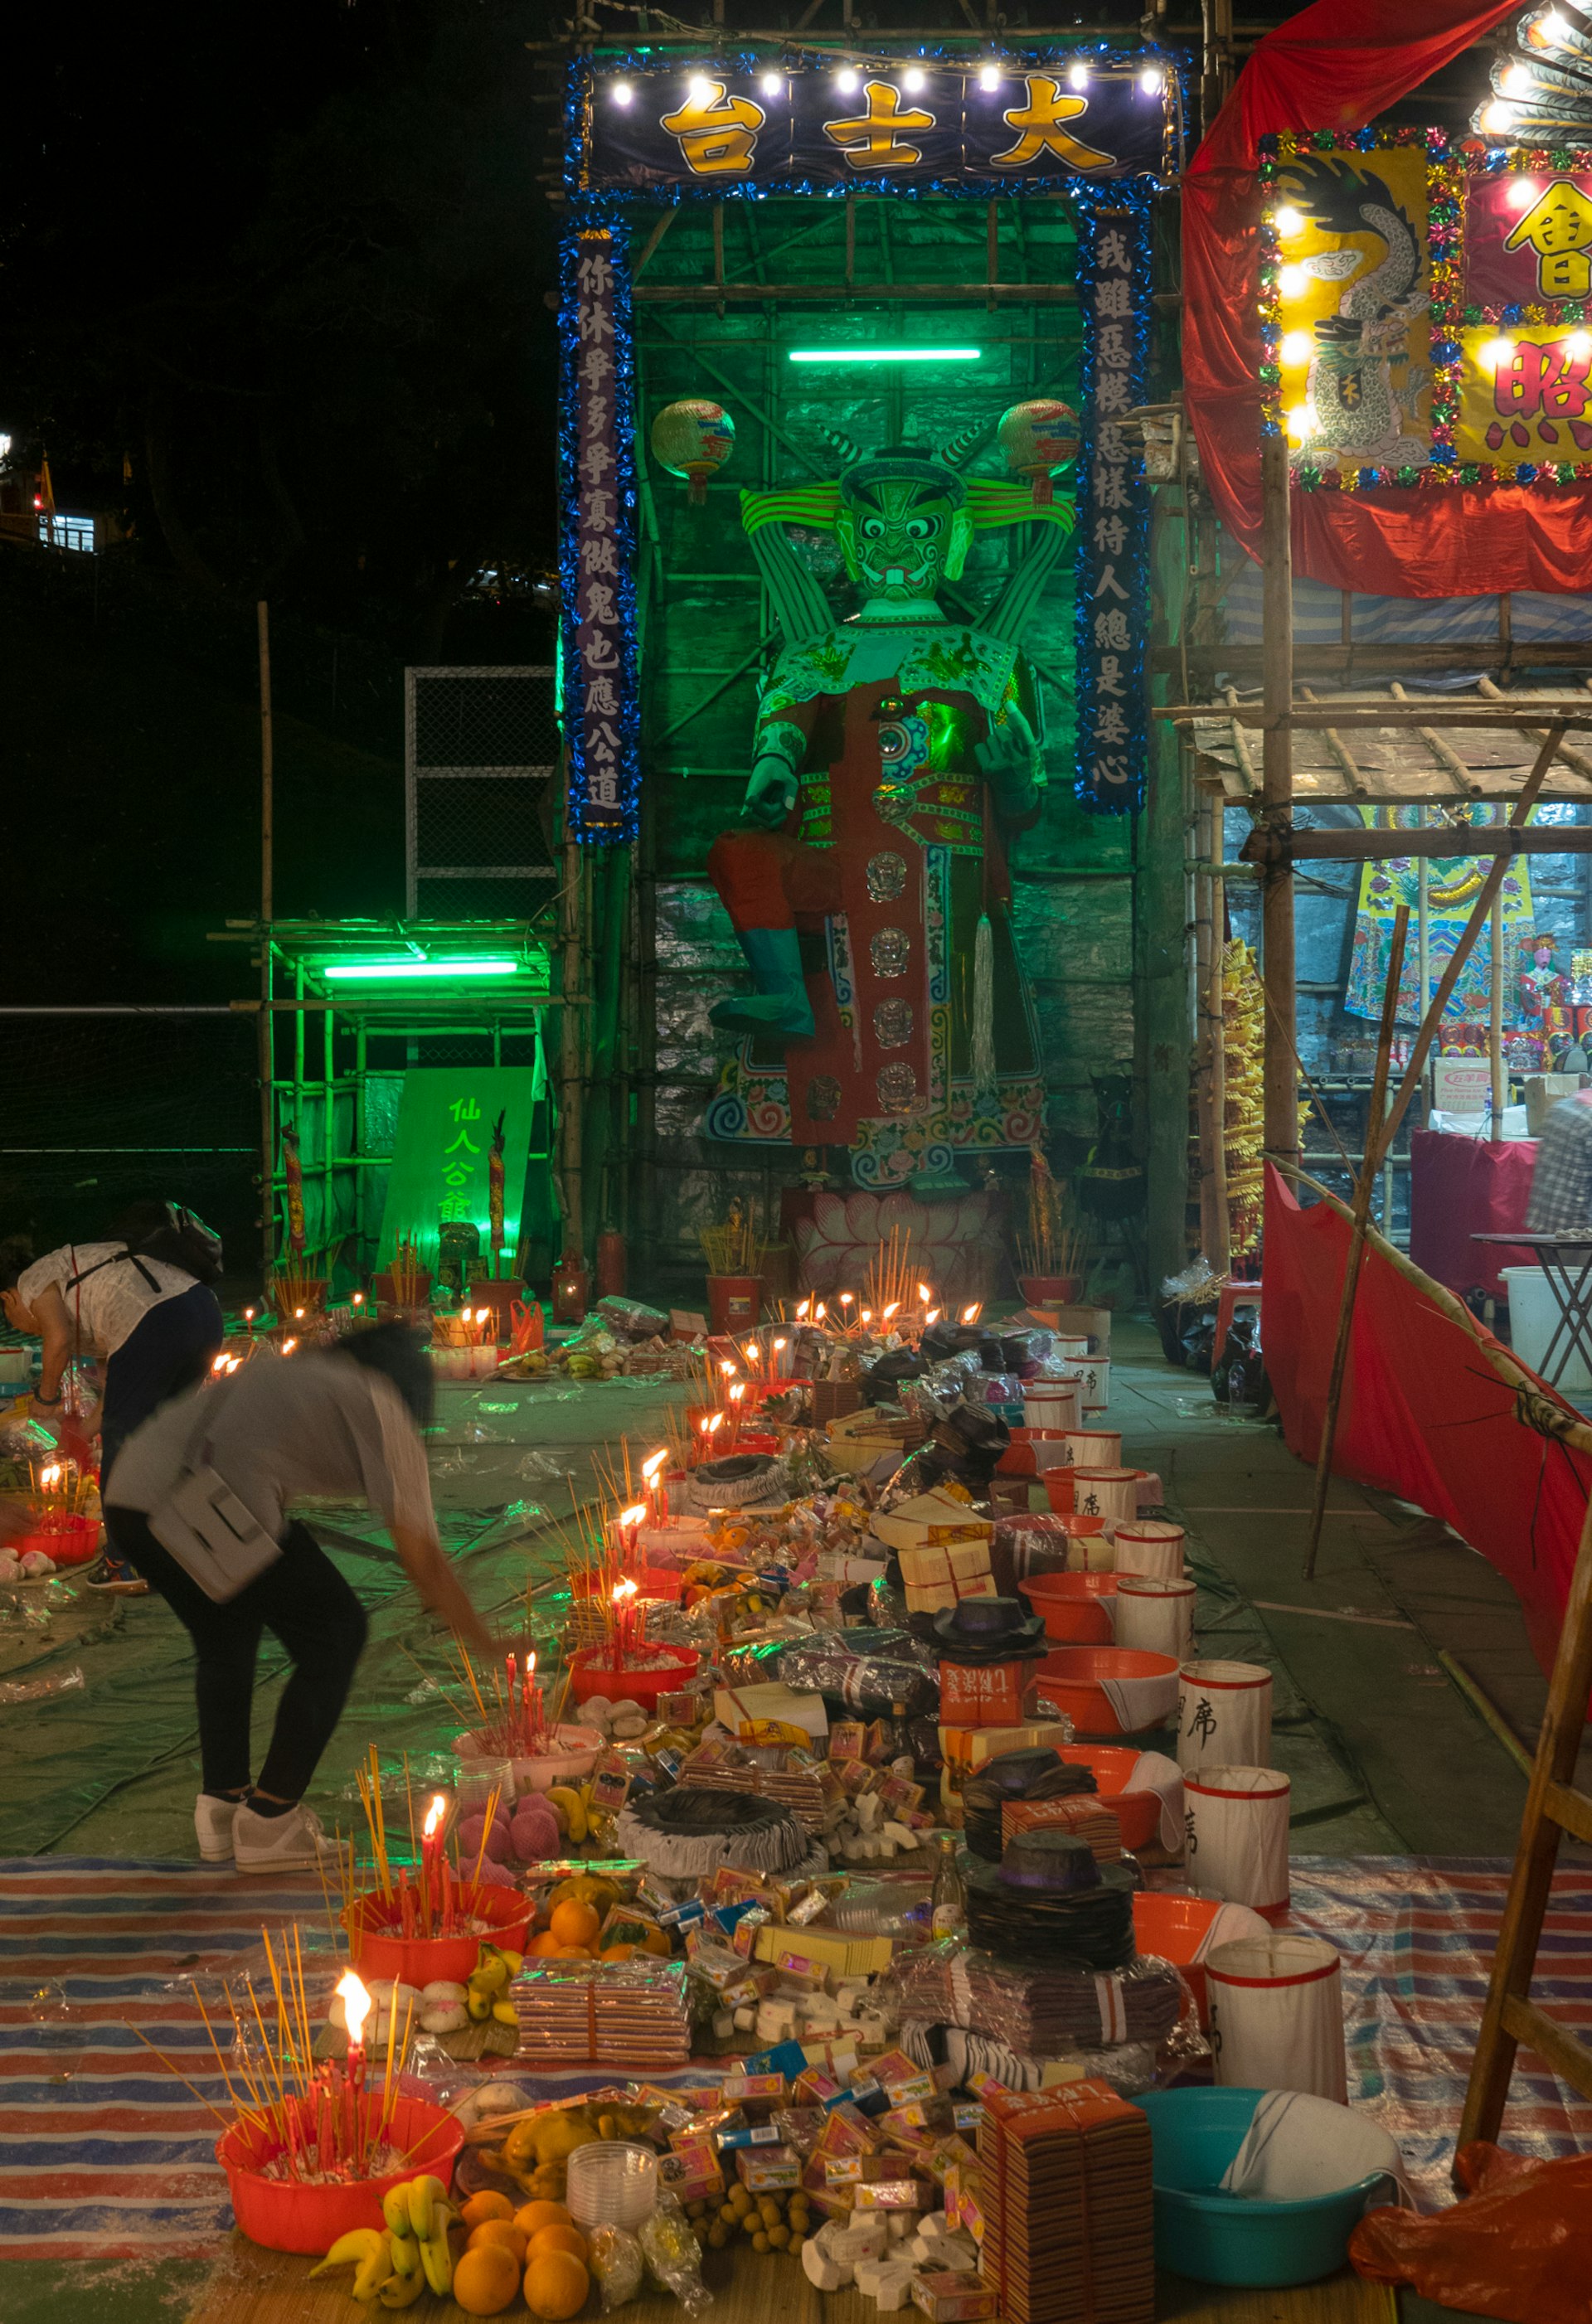 A woman lighting an incense stick on the street in Hong Kong to ward off angry spirits during the Hungry Ghost Festival